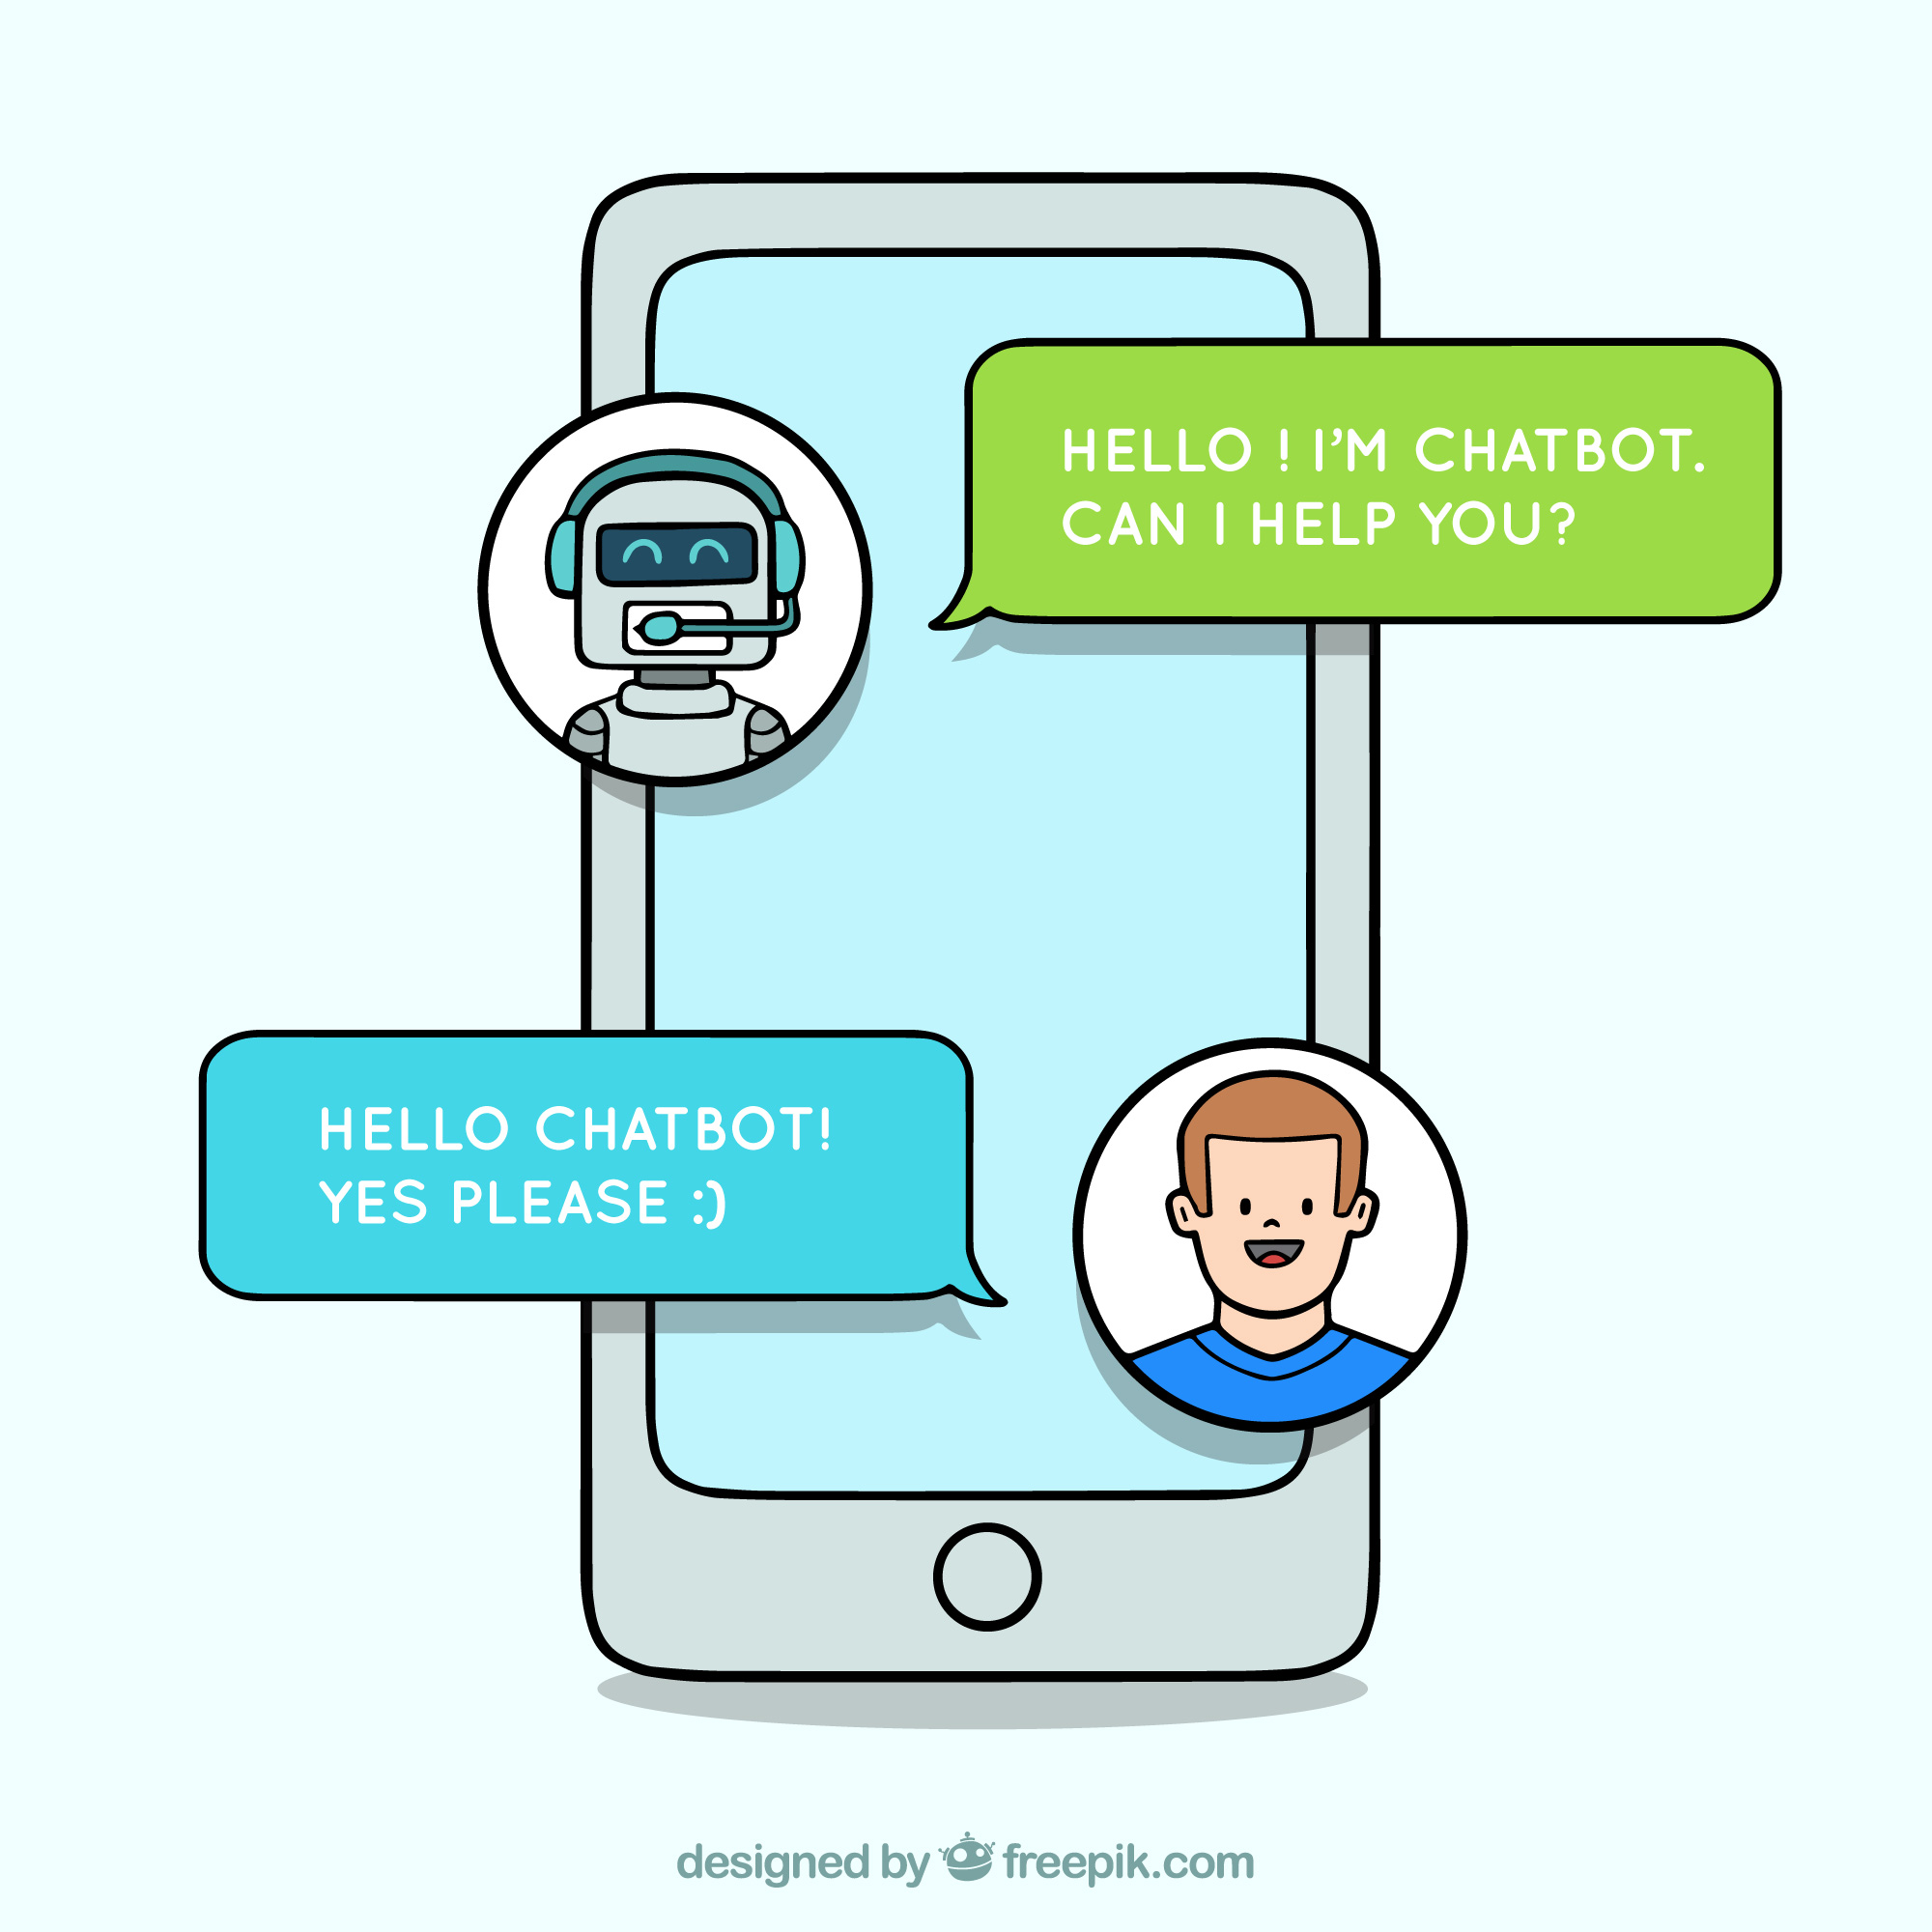 Introduction to Chatbots in Banking